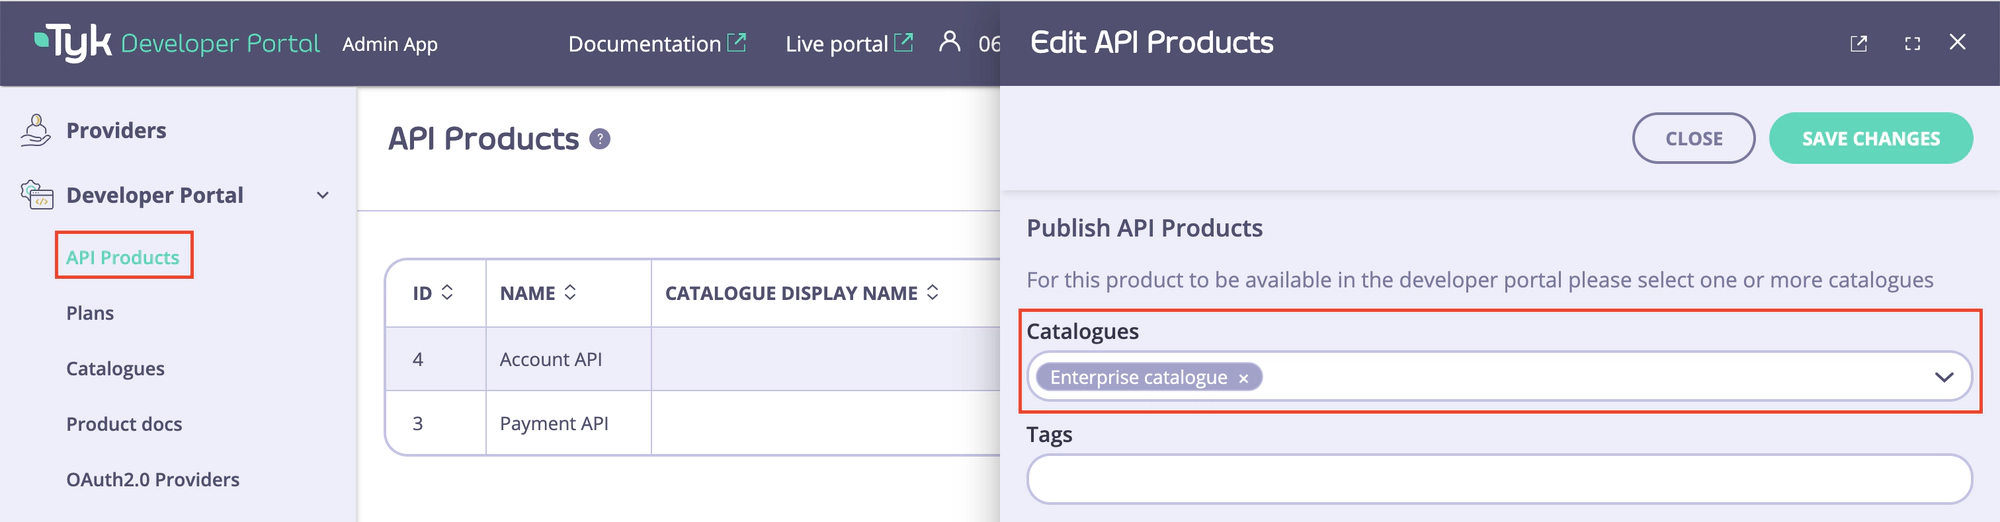 Adding a product to a catalogue through the API Products menu